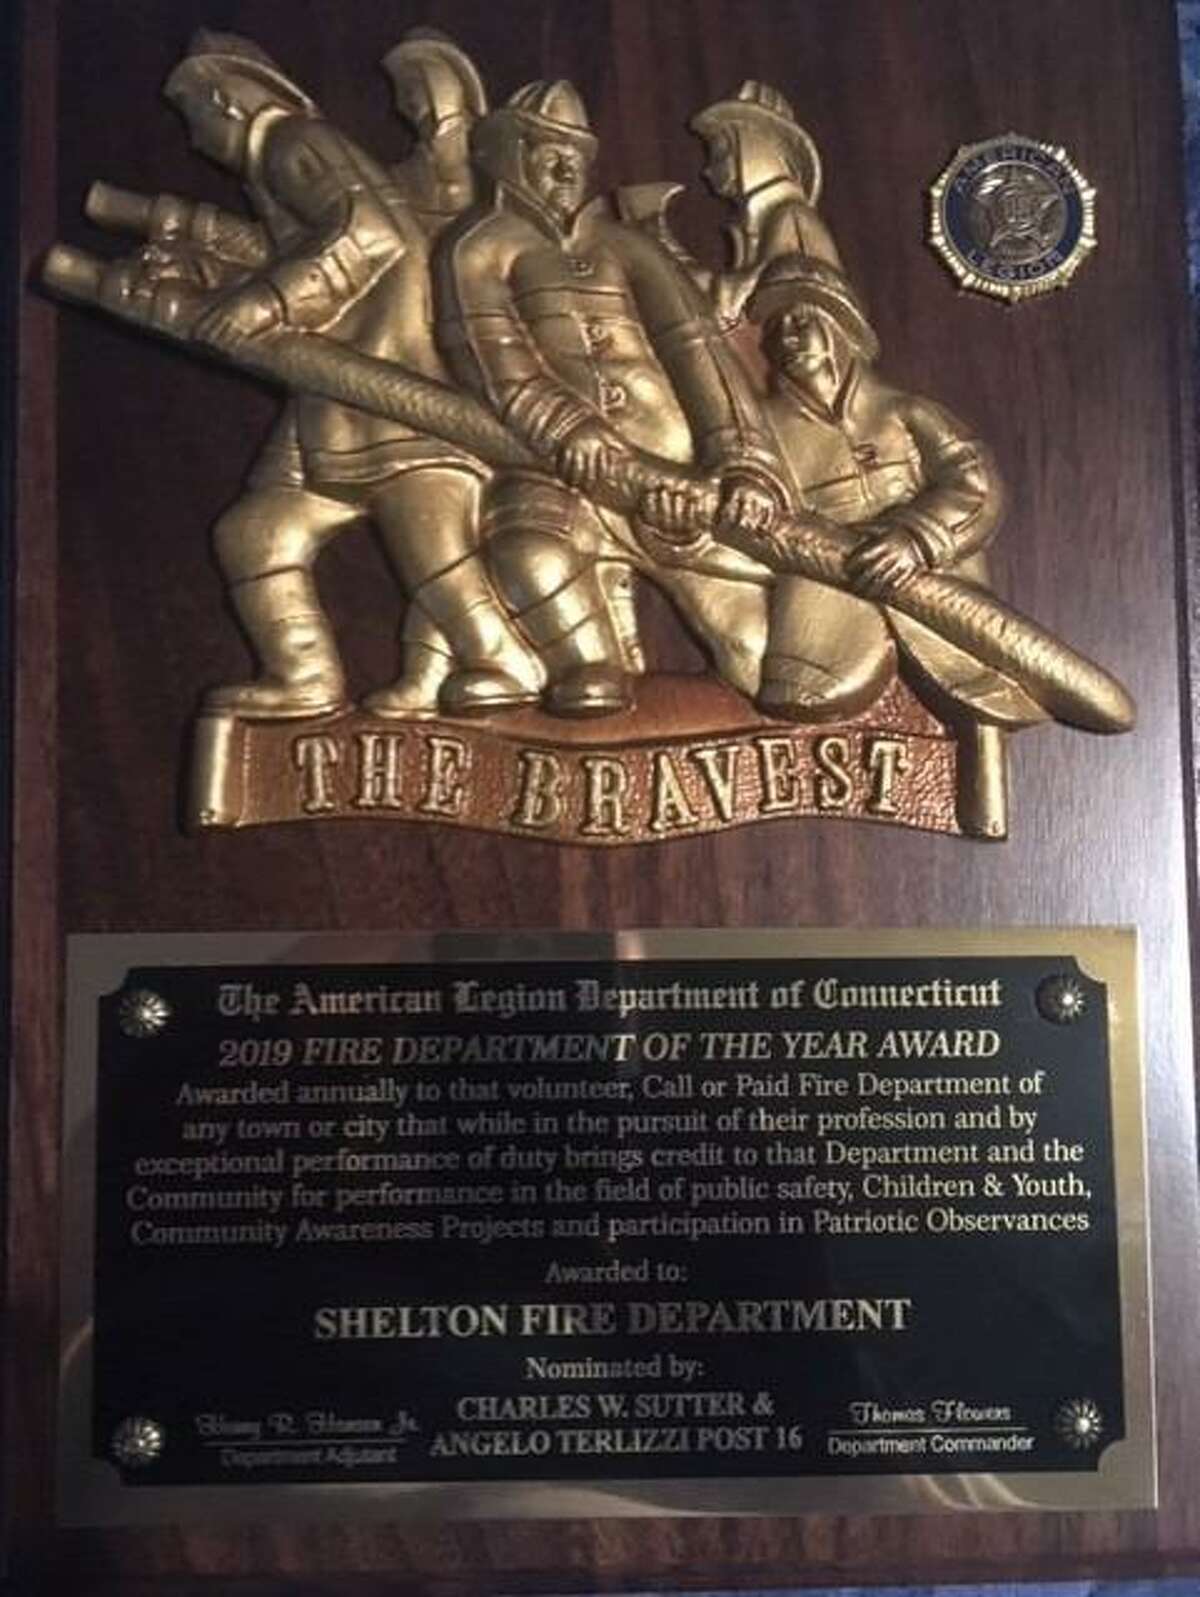 The Shelton Fire Department was awarded the state’s top honor by the American Legion Department of Connecticut. Above is the plaque.